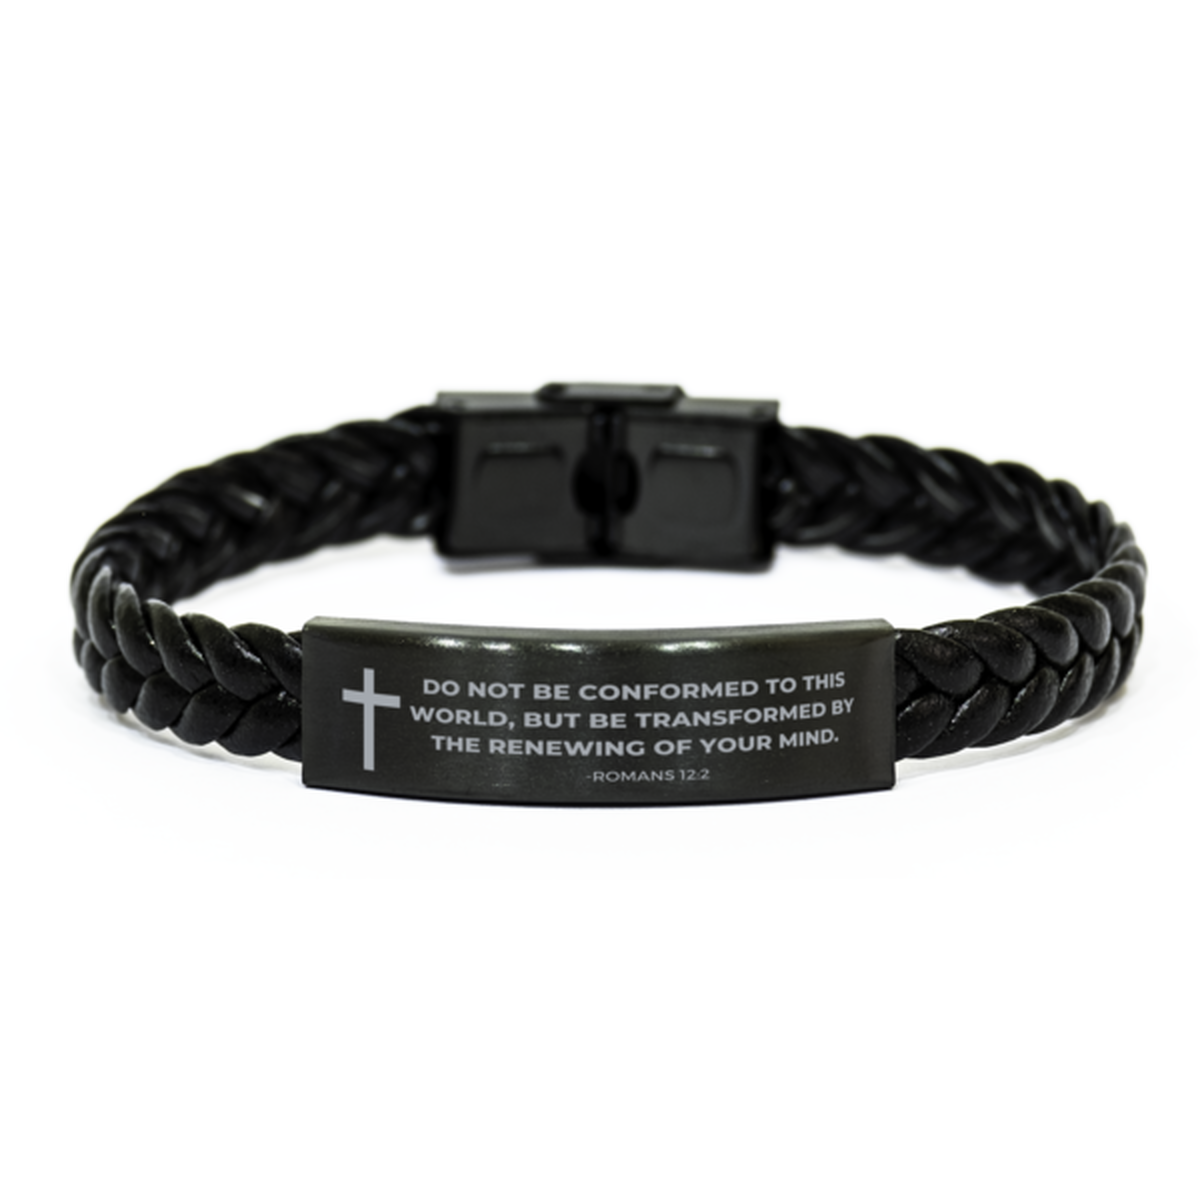 Baptism Gifts For Teenage Boys Girls, Christian Bible Verse Braided Leather Bracelet, Do not be conformed to this world, Catholic Confirmation Gifts for Son, Godson, Grandson, Nephew